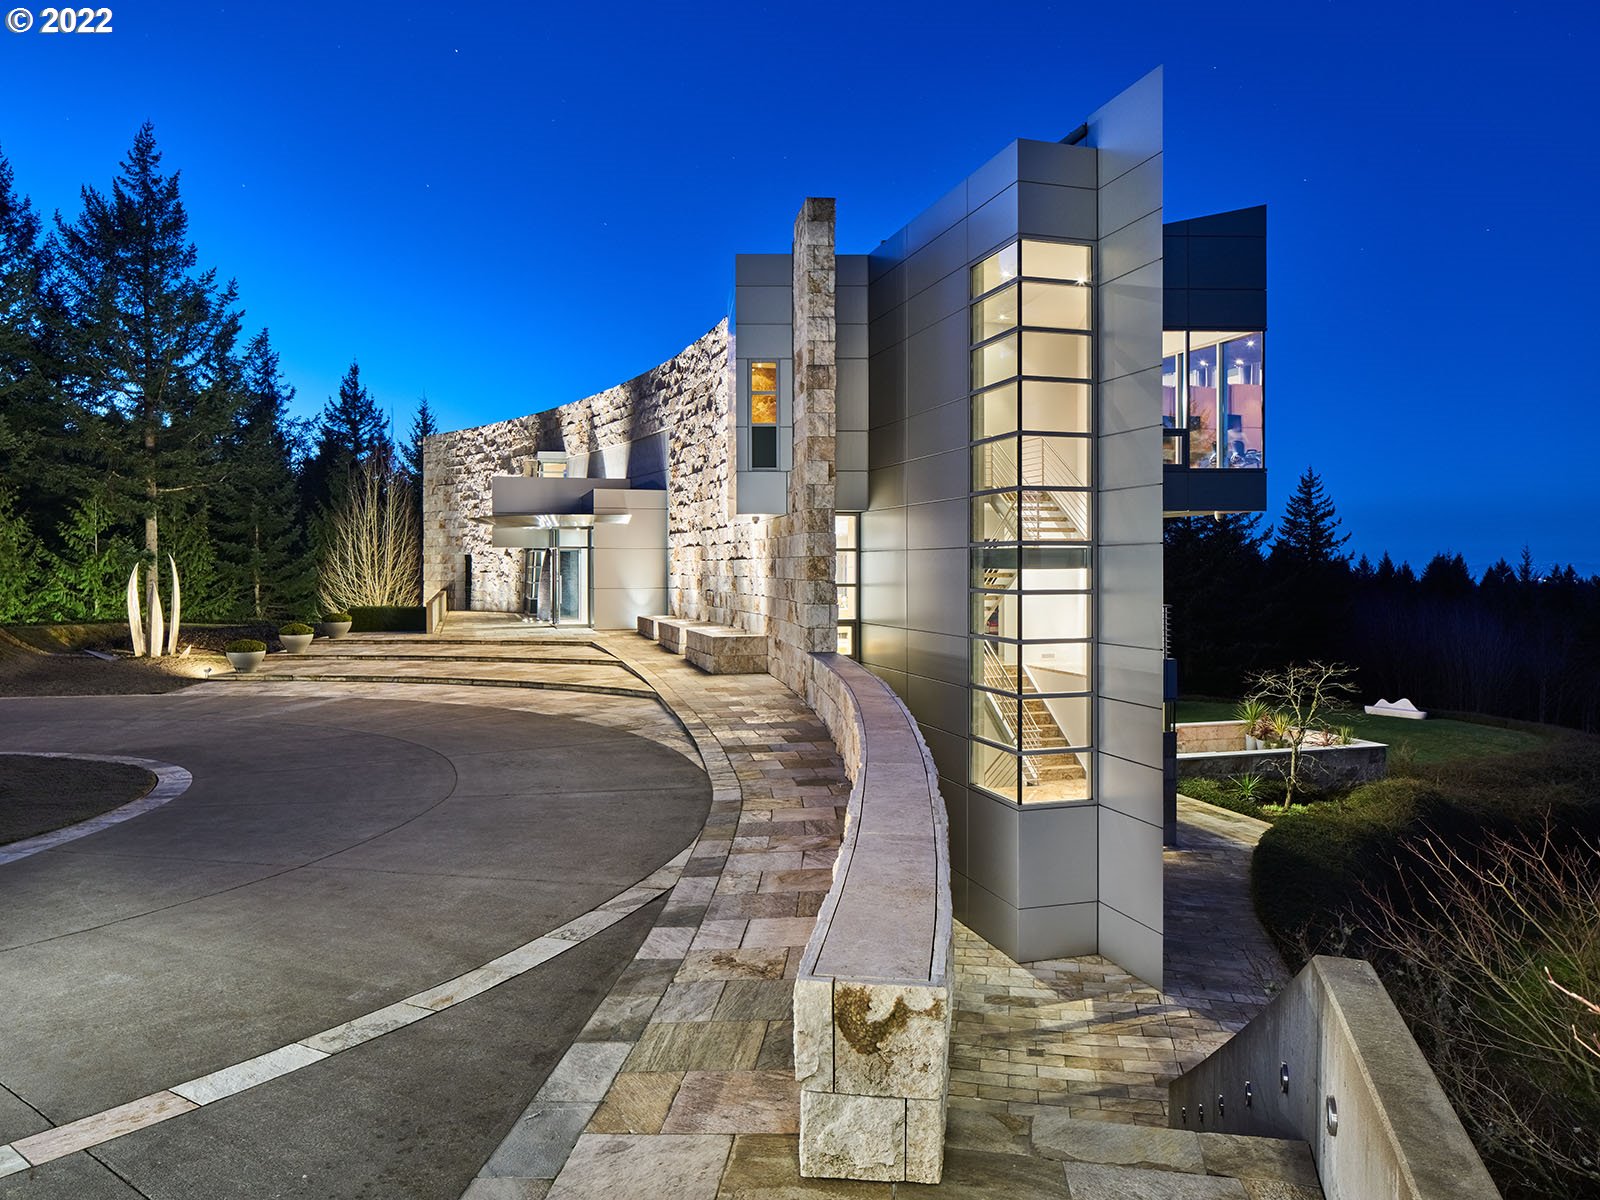 A masterpiece of light & design, this architecturally significant Pacific NW contemporary is filled w/incredible statements, offering the perfect balance between function & form. Creative & spectacular. Unprecedented attention to detail. Views, privacy, gated, 9.74 acres, close proximity to airports and city, adjacent to Forest Park, 6 car garage, pool&spa, music room, guest house & a myriad of other exceptional offerings, create a unique opportunity for the discerning life enthusiast. Awesome!